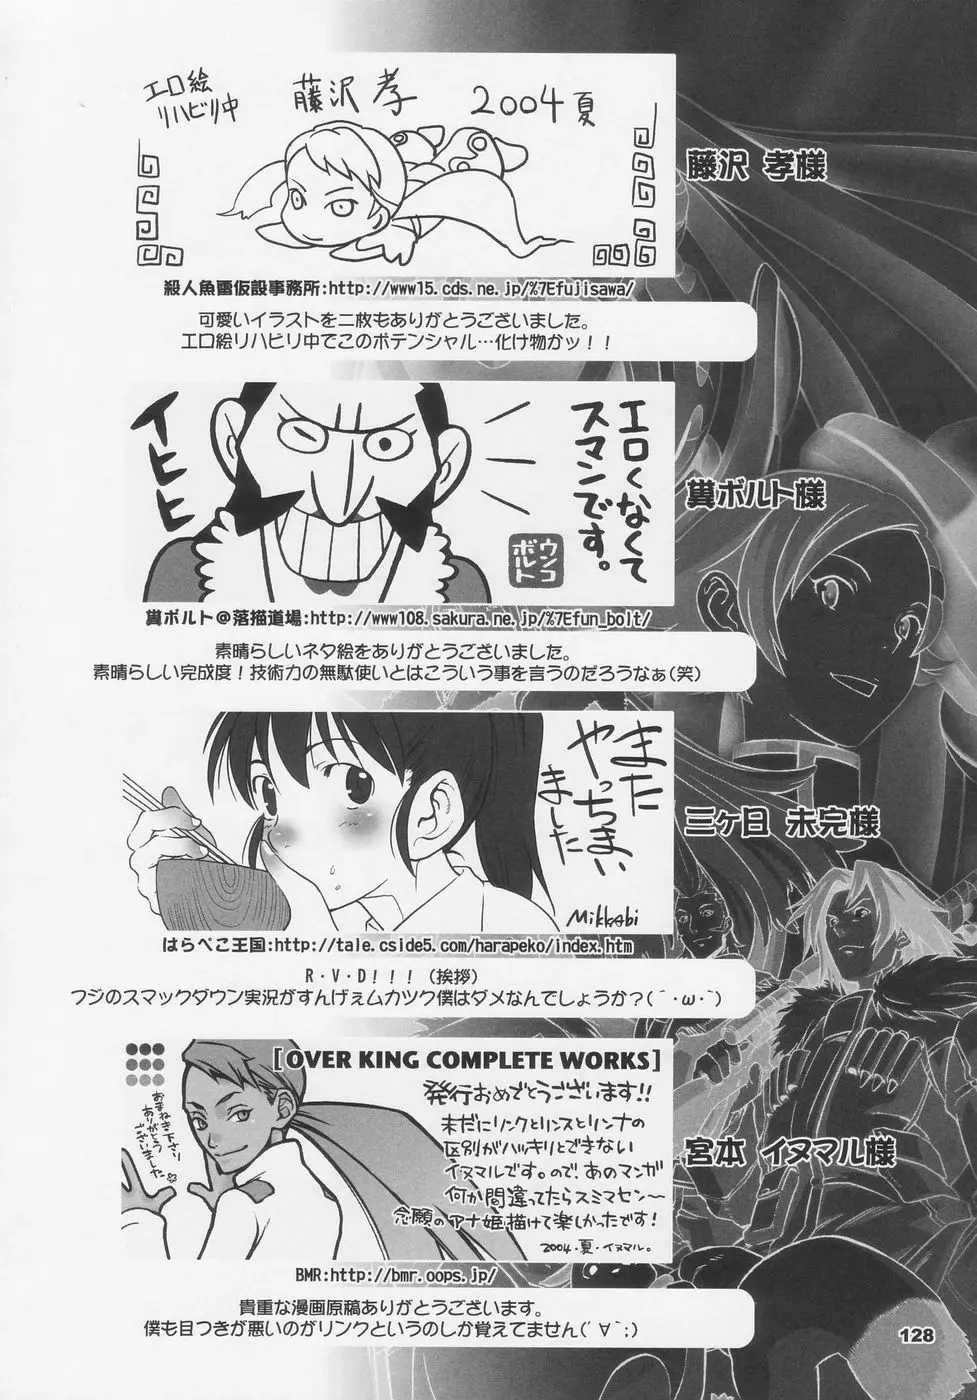 OVER KING COMPLETE WORKS Page.128